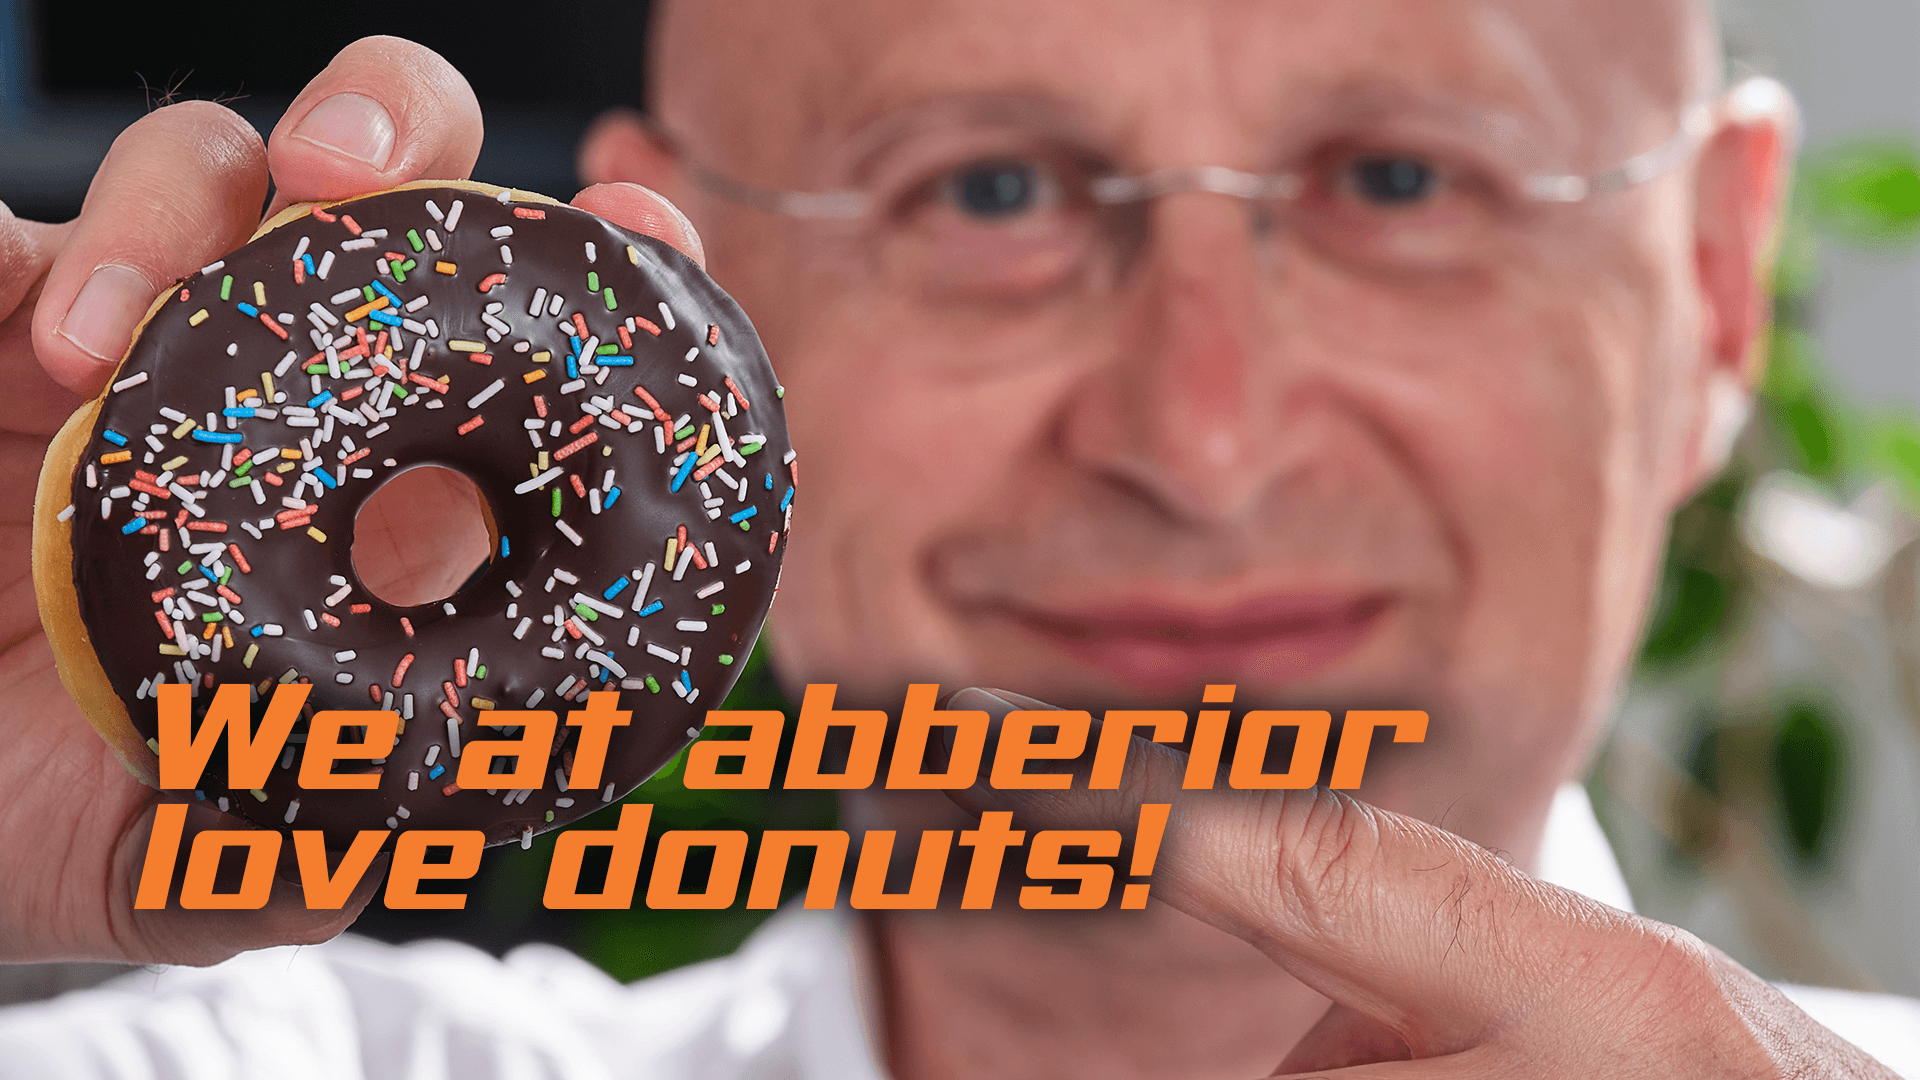 We at abberior love Donuts